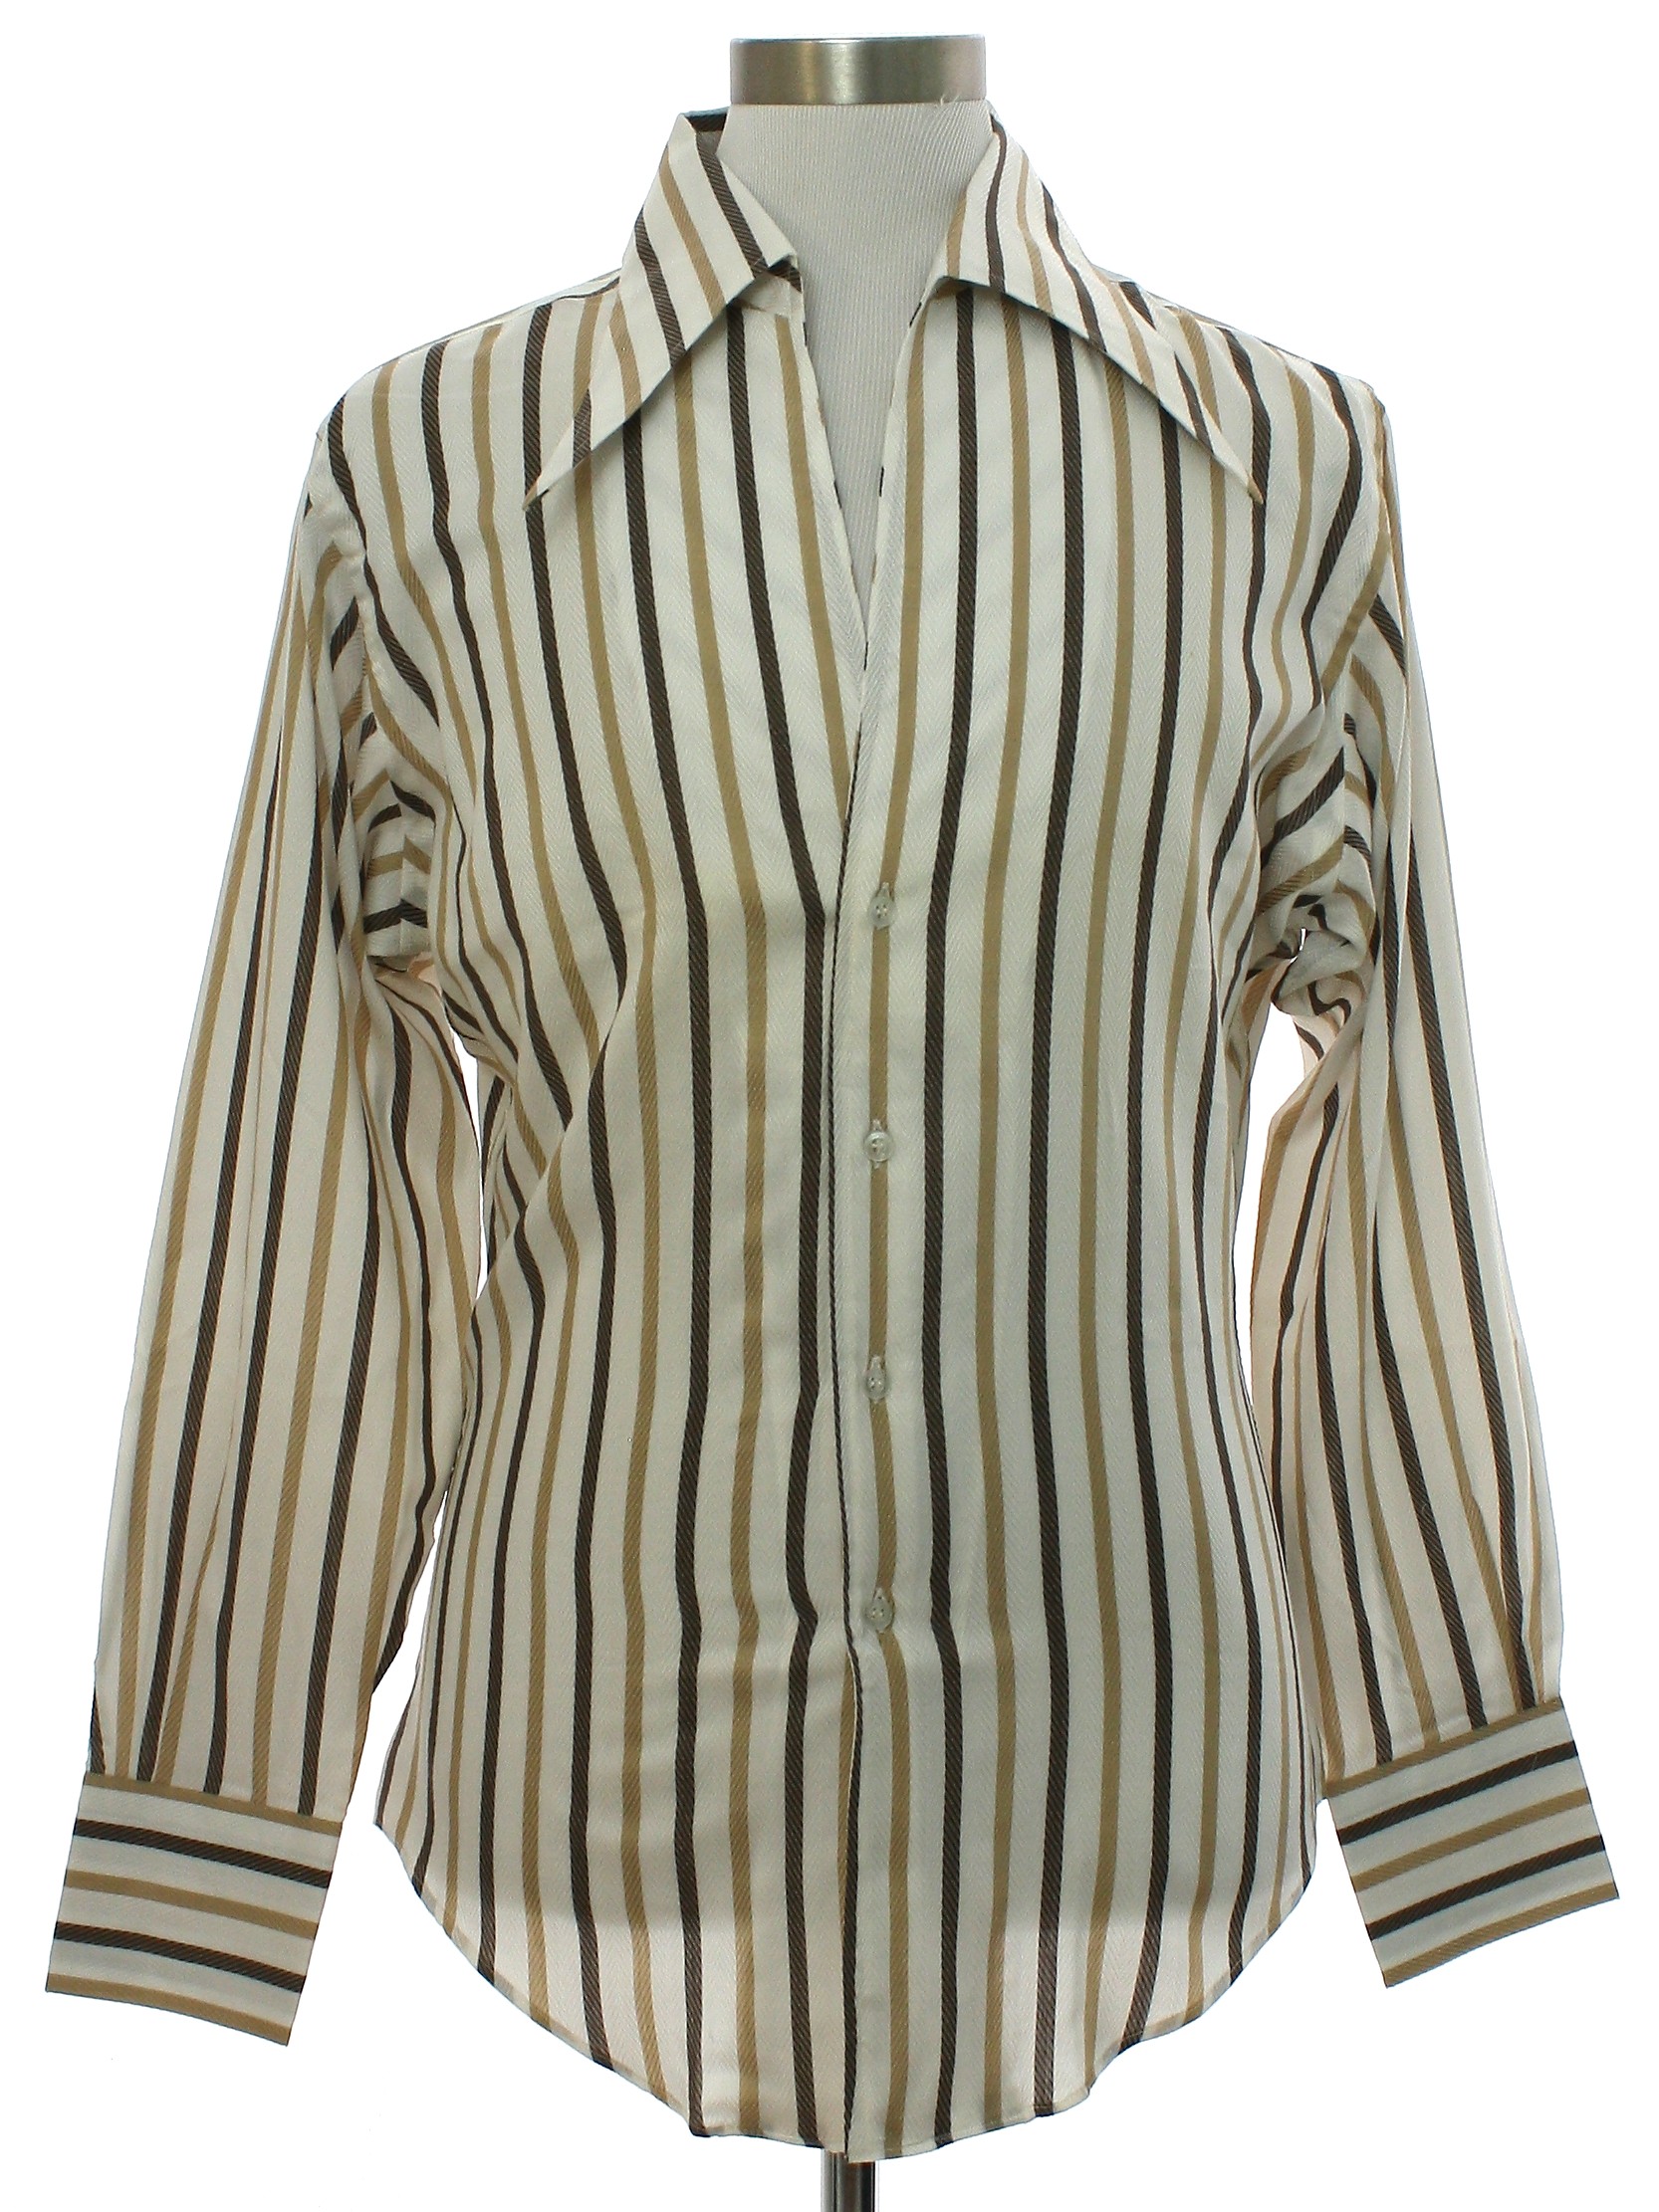 Retro 1960's Shirt (Leon Tailoring Co (by Morrie Geyer)) : 60s -Leon ...